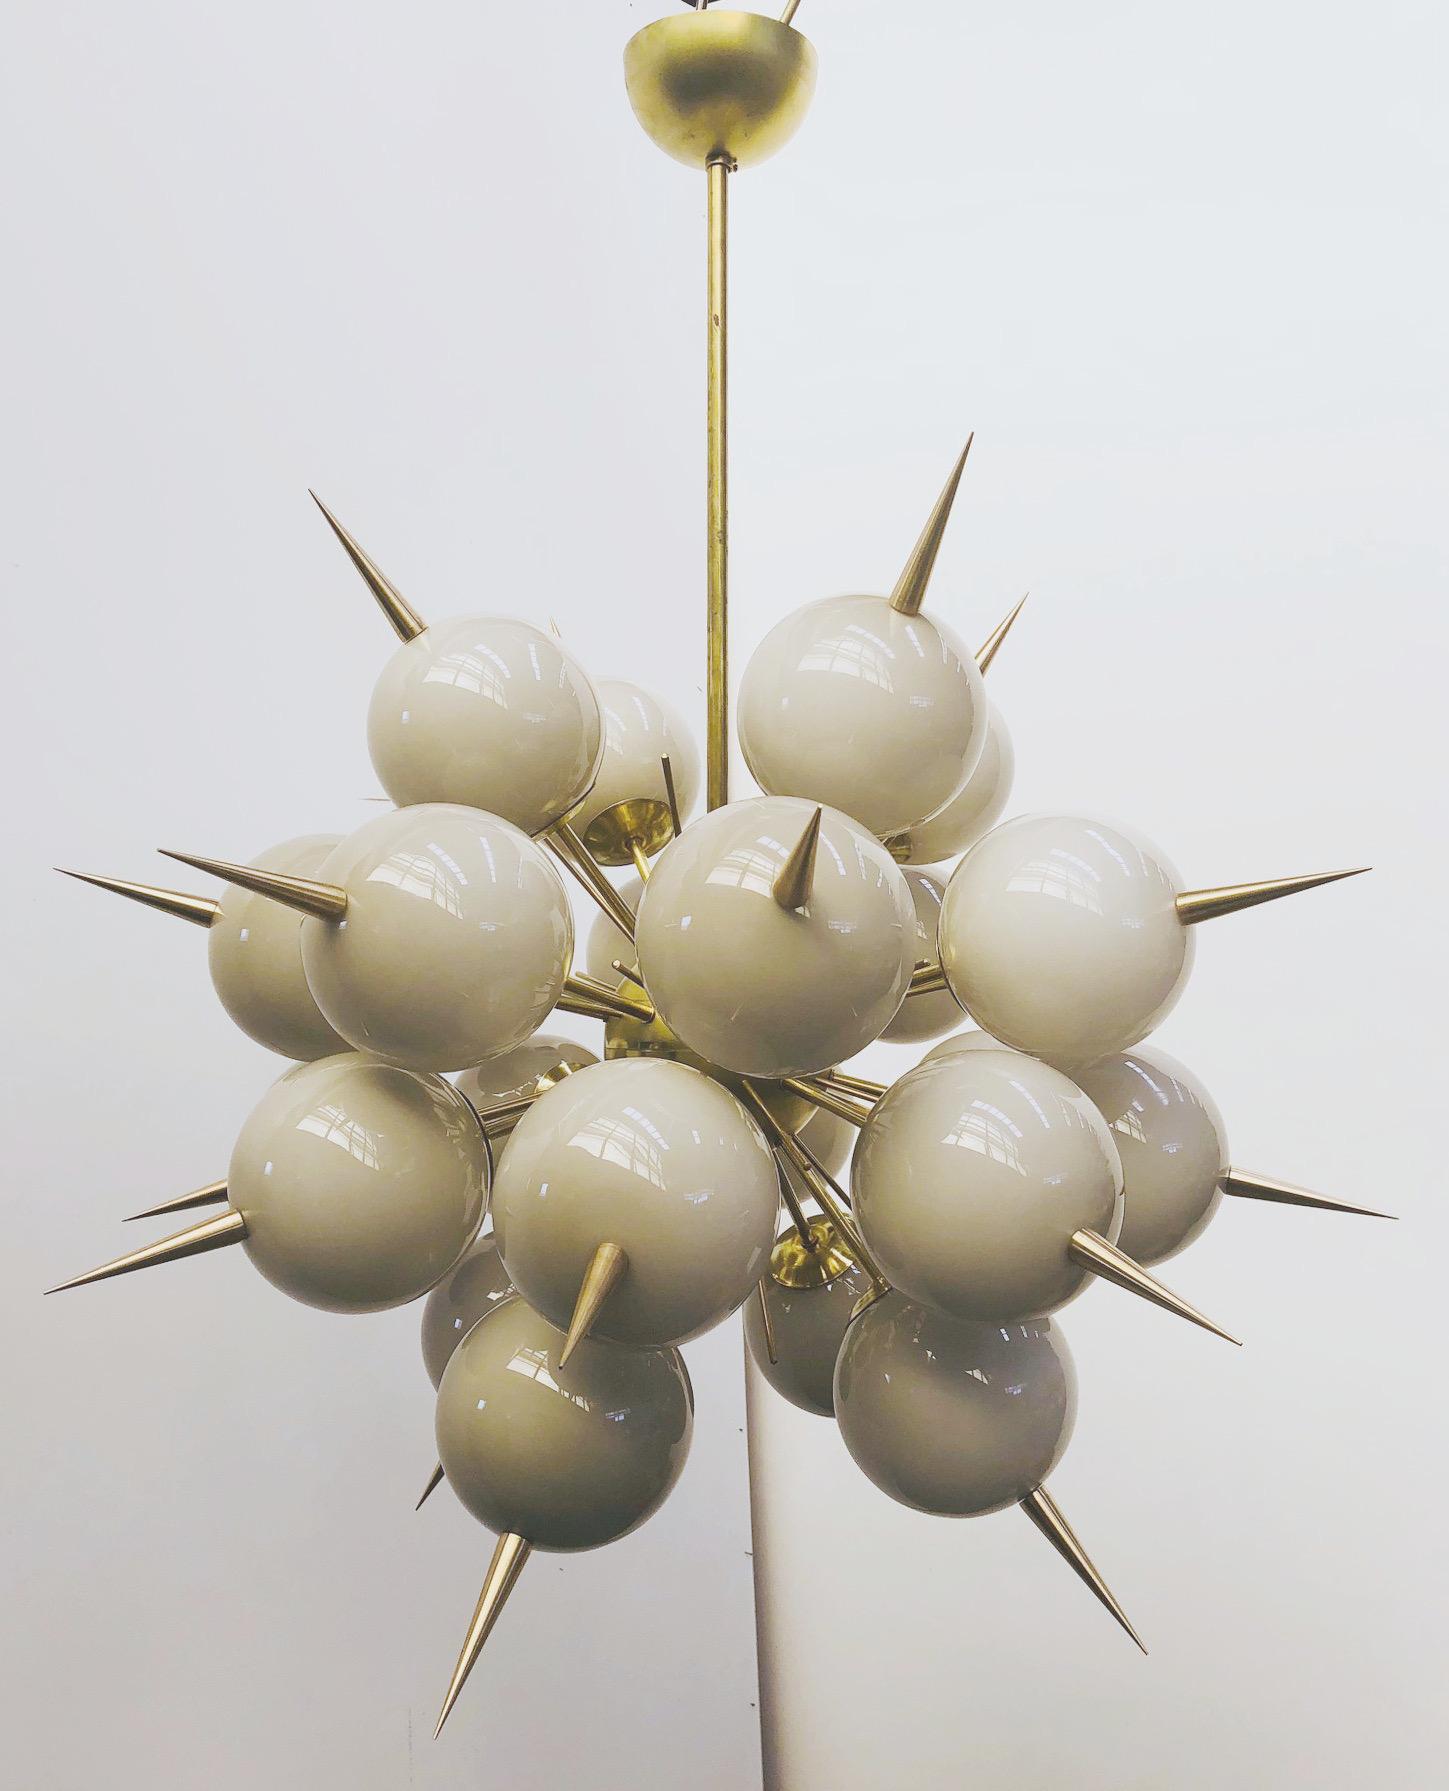 Italian sputnik chandelier with 24 Murano glass globes and solid brass spikes mounted on brass frame / Designed by Fabio Bergomi for Fabio Ltd / Made in Italy
24 lights / E12 or E14 type / max 40W each
Diameter: 38 inches / Height: 46 inches